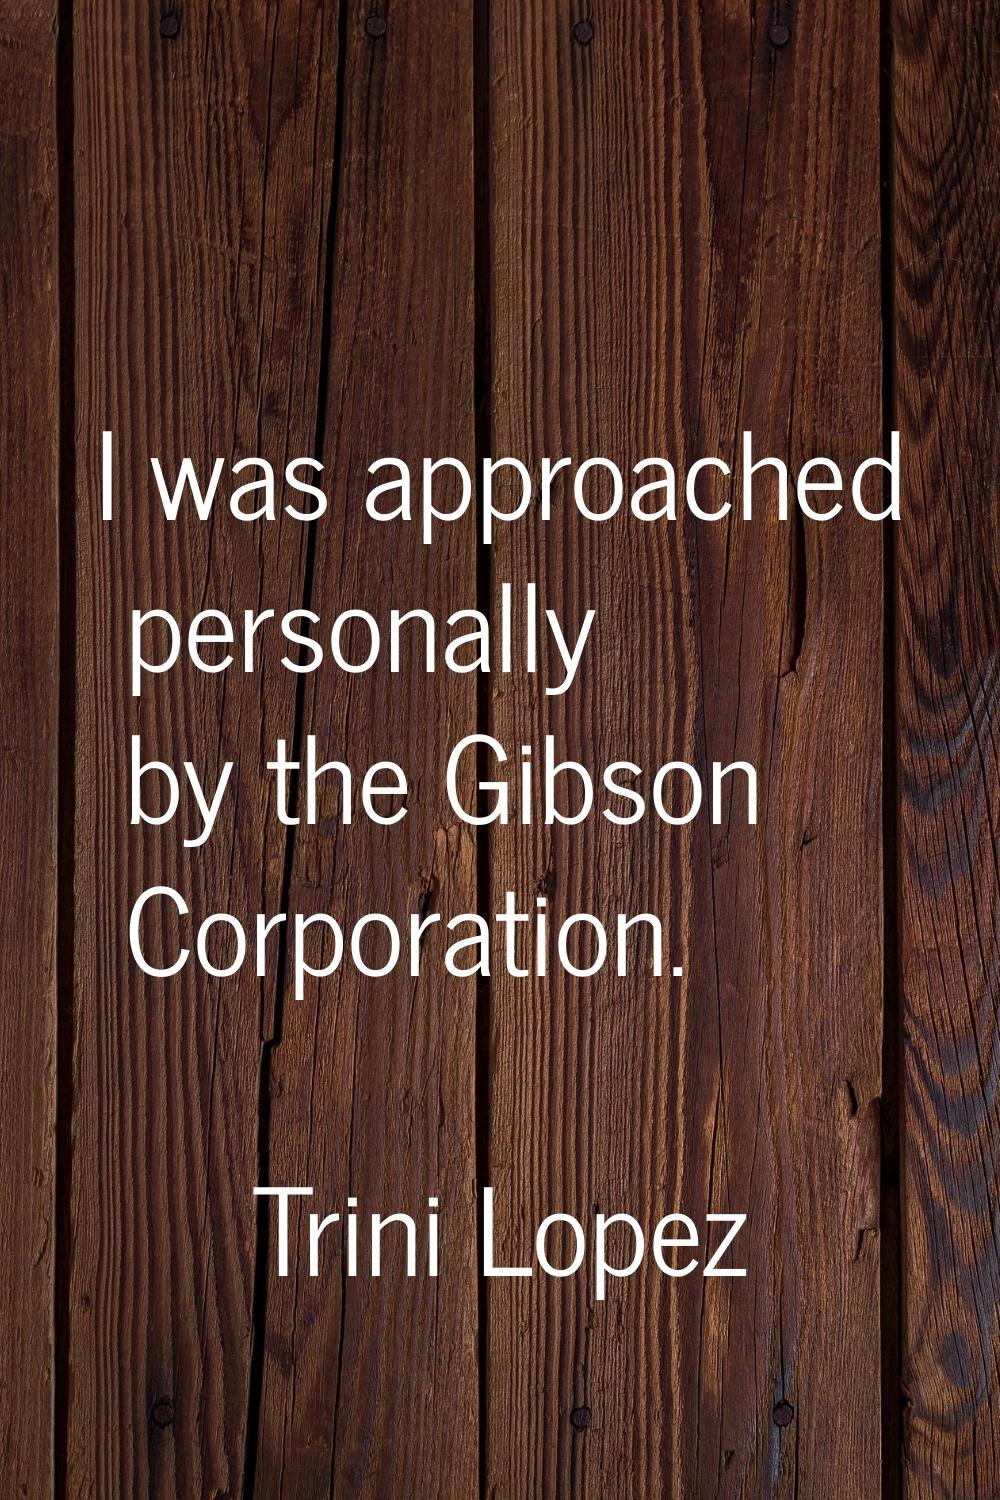 I was approached personally by the Gibson Corporation.